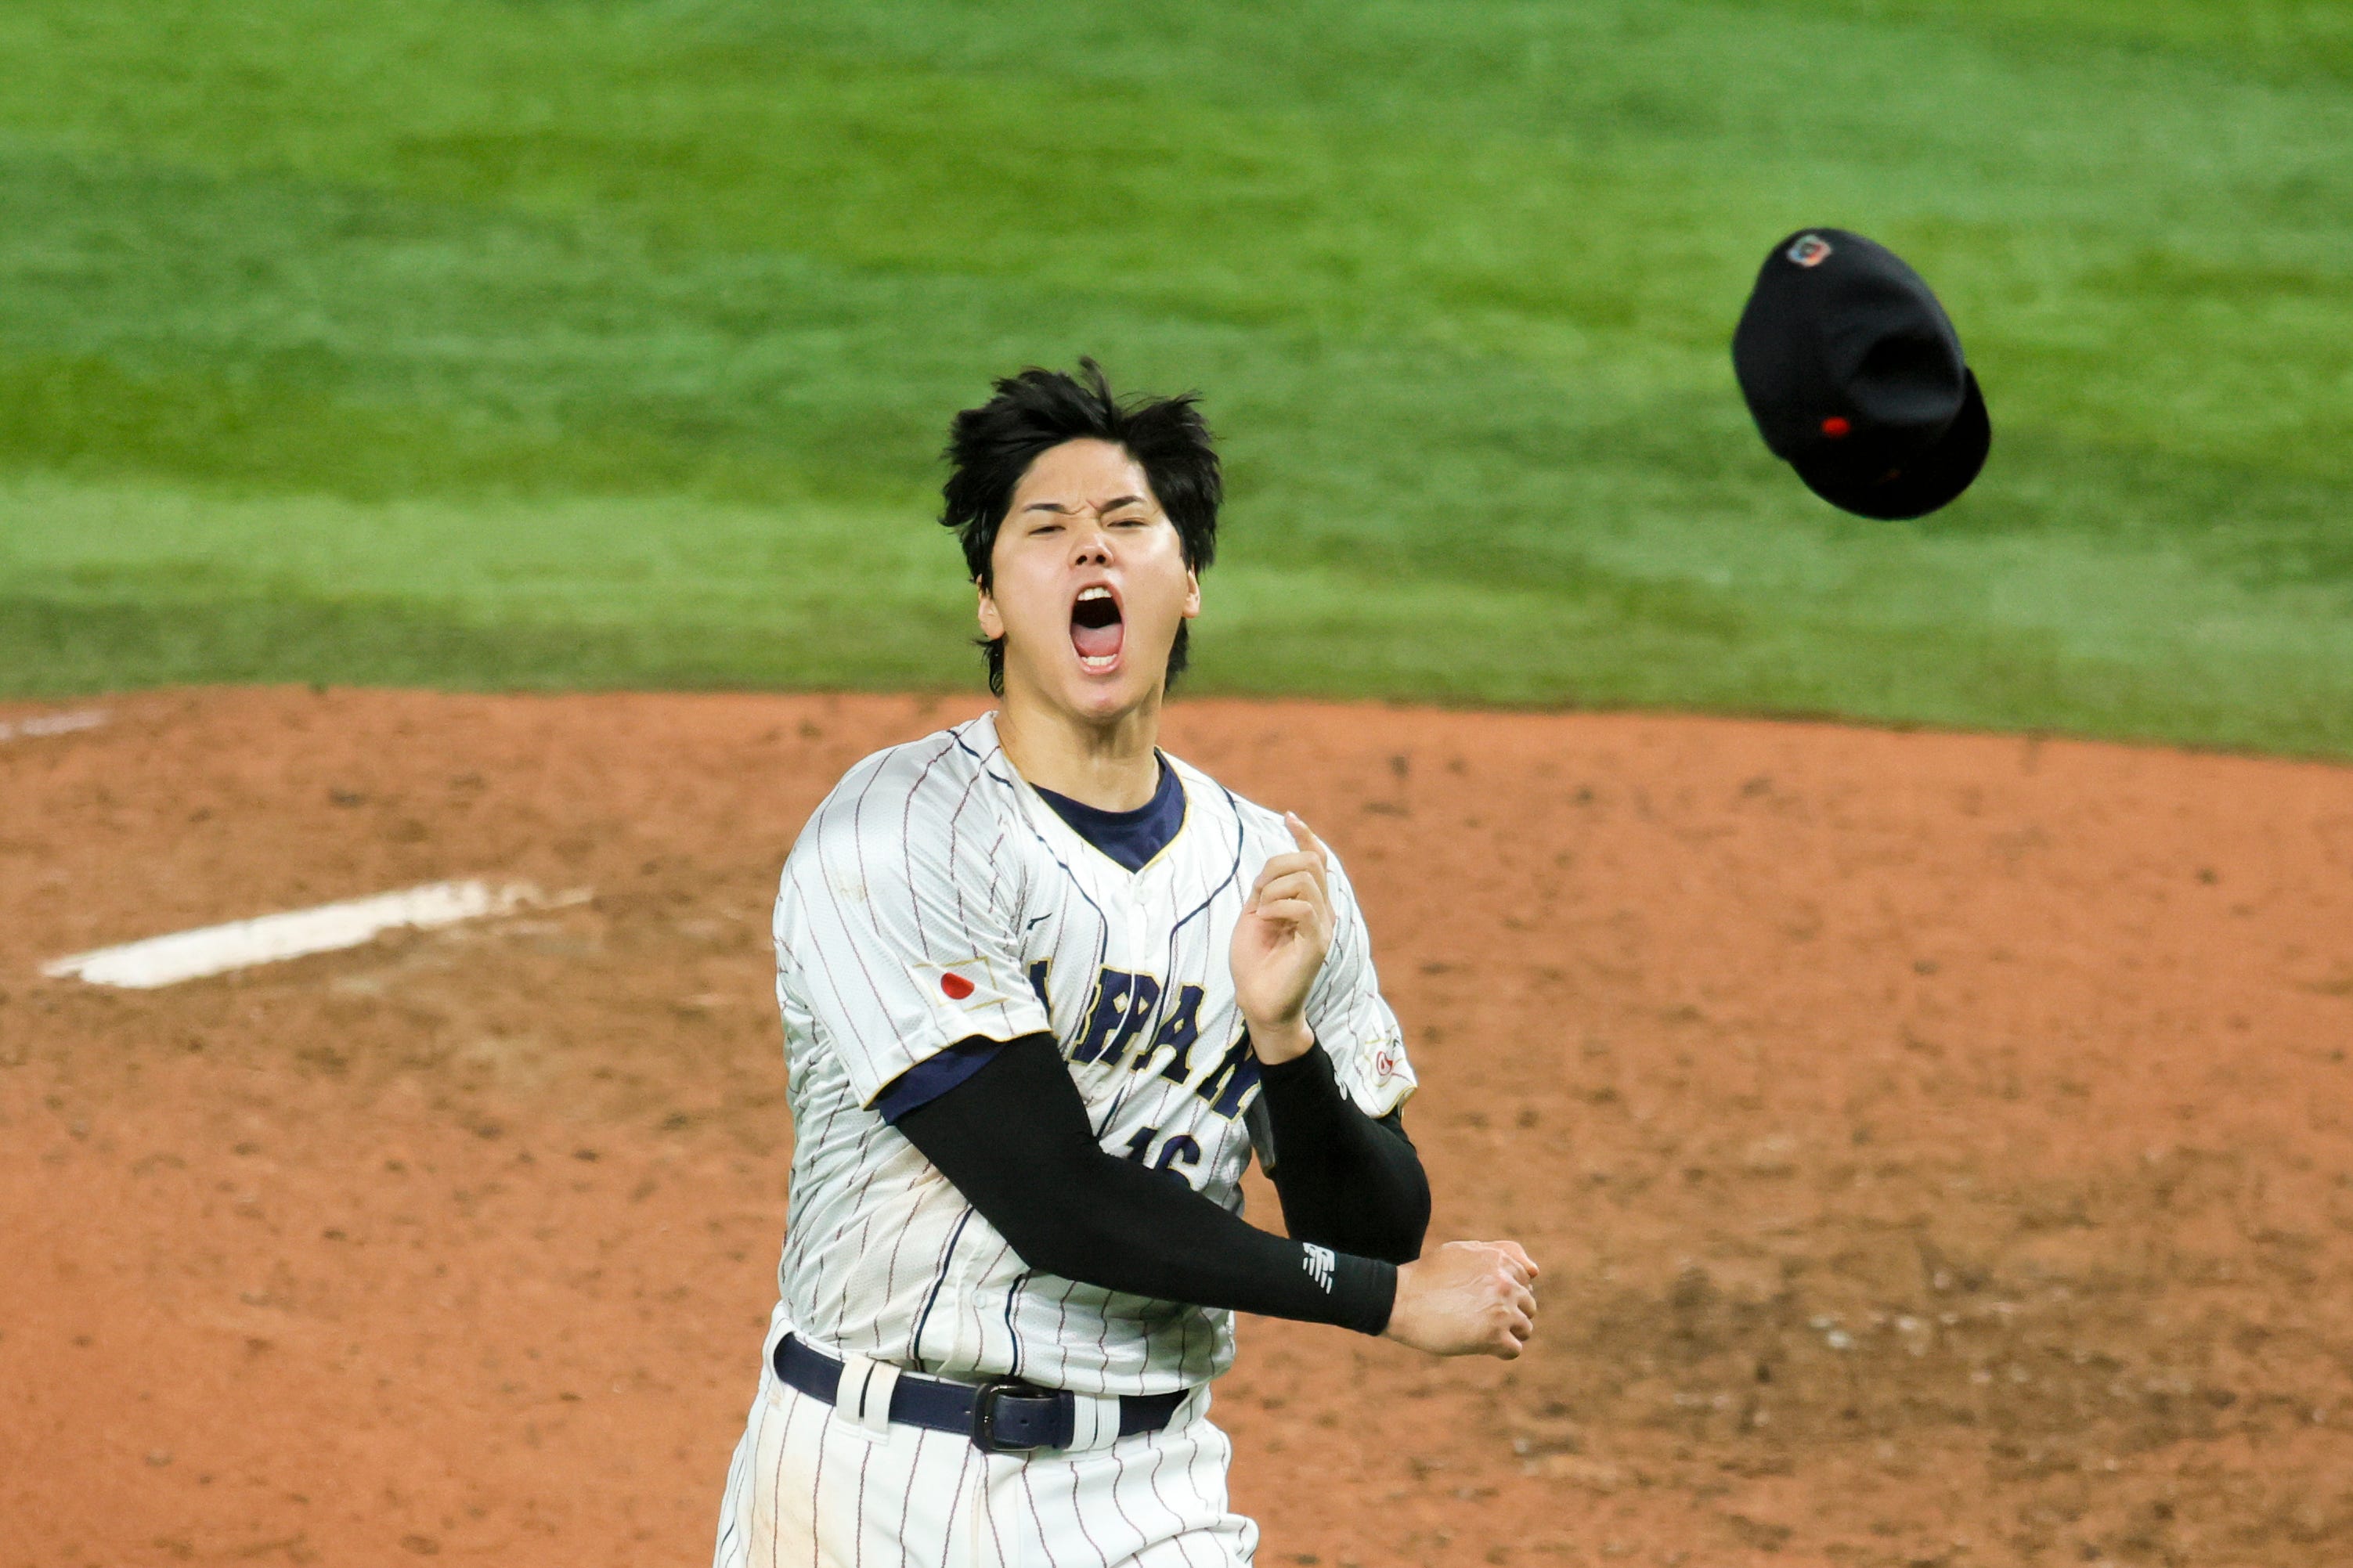 'He won Round 1:' Shohei Ohtani vs. Mike Trout gave World Baseball Classic the storybook ending it deserved